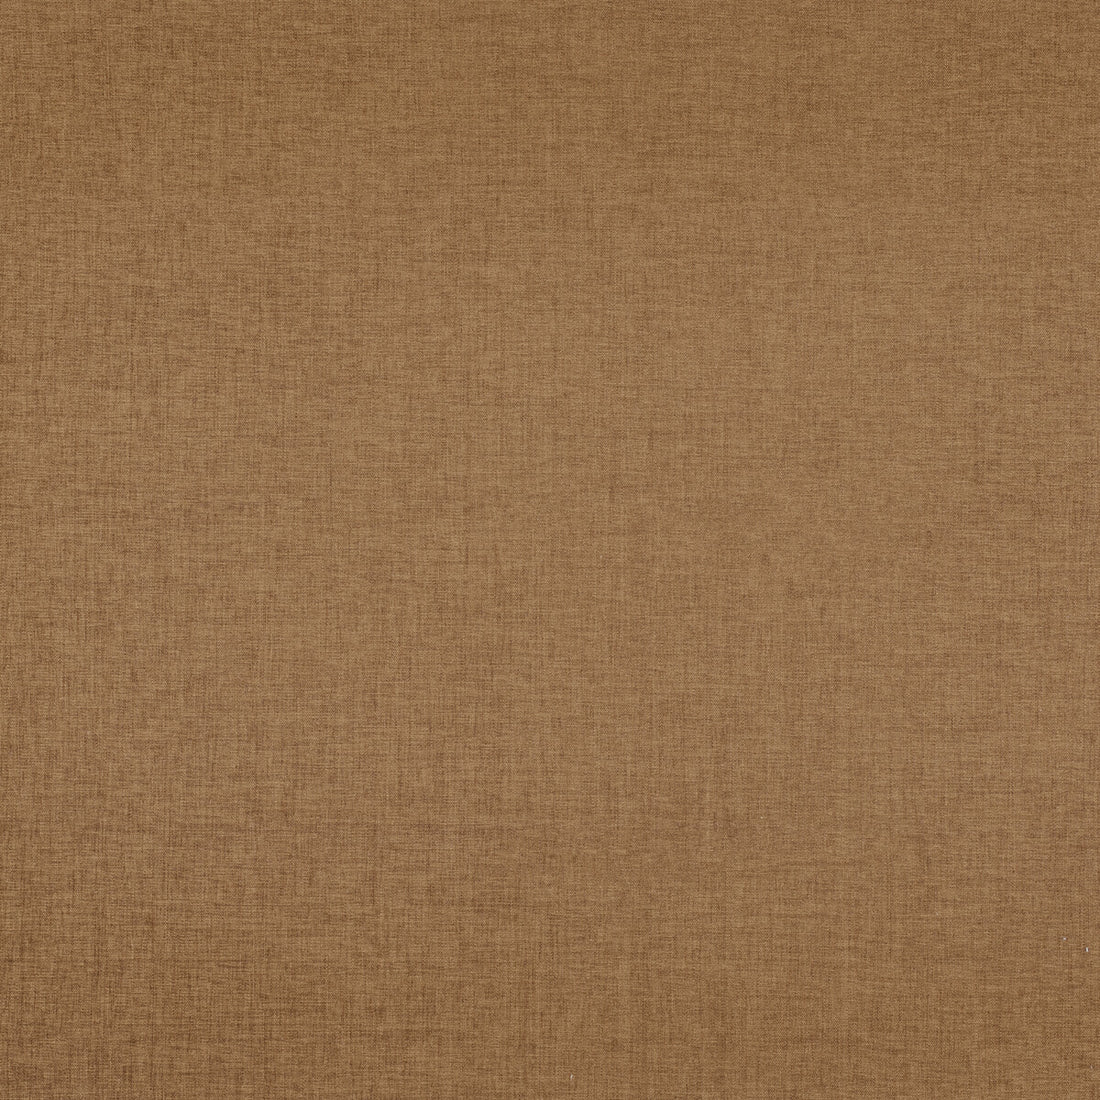 Kravet Smart fabric in 36095-606 color - pattern 36095.606.0 - by Kravet Smart in the Eco-Friendly Chenille collection